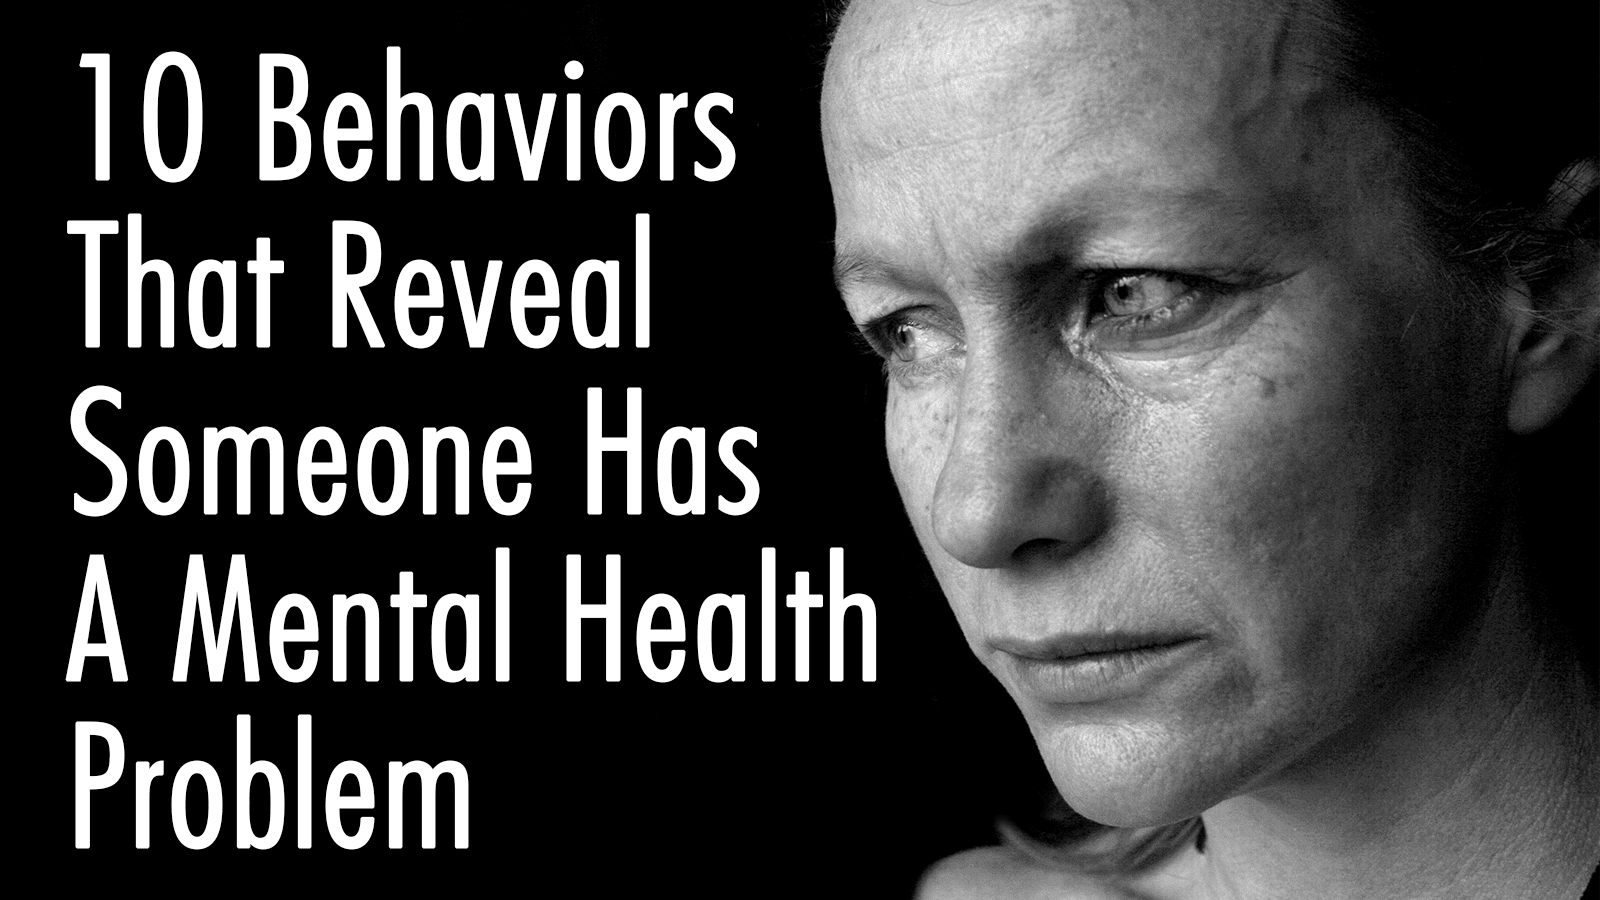 10 Behaviors That Reveal Someone Has A Mental Health Problem